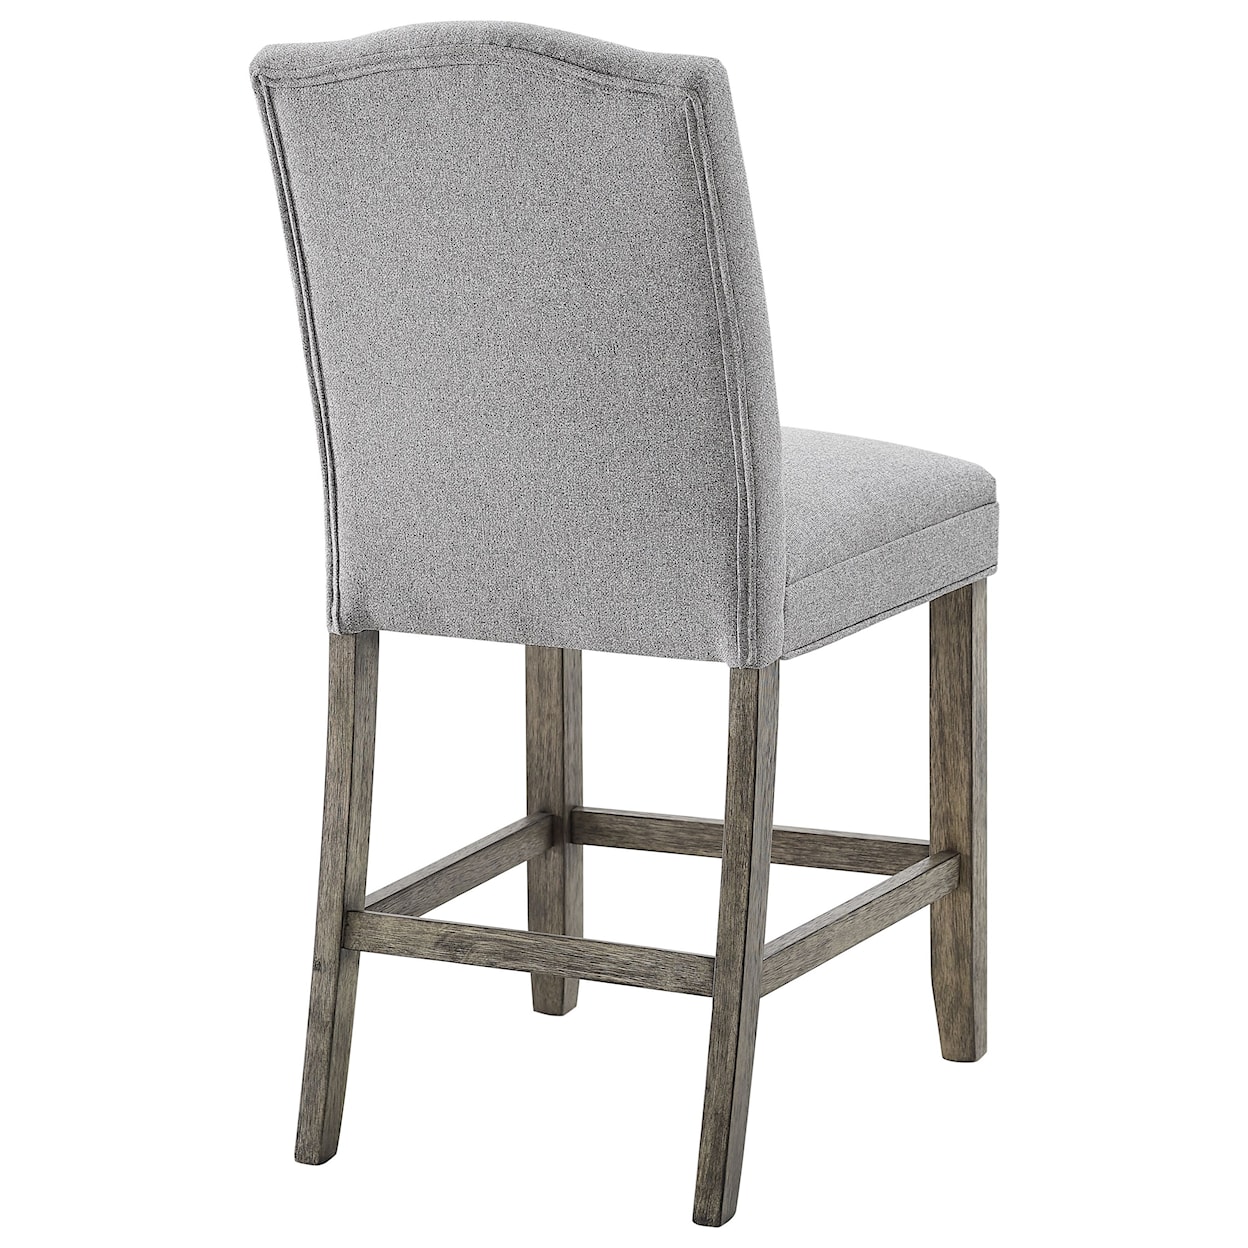 Steve Silver Grayson Upholstered Counter Height Chair